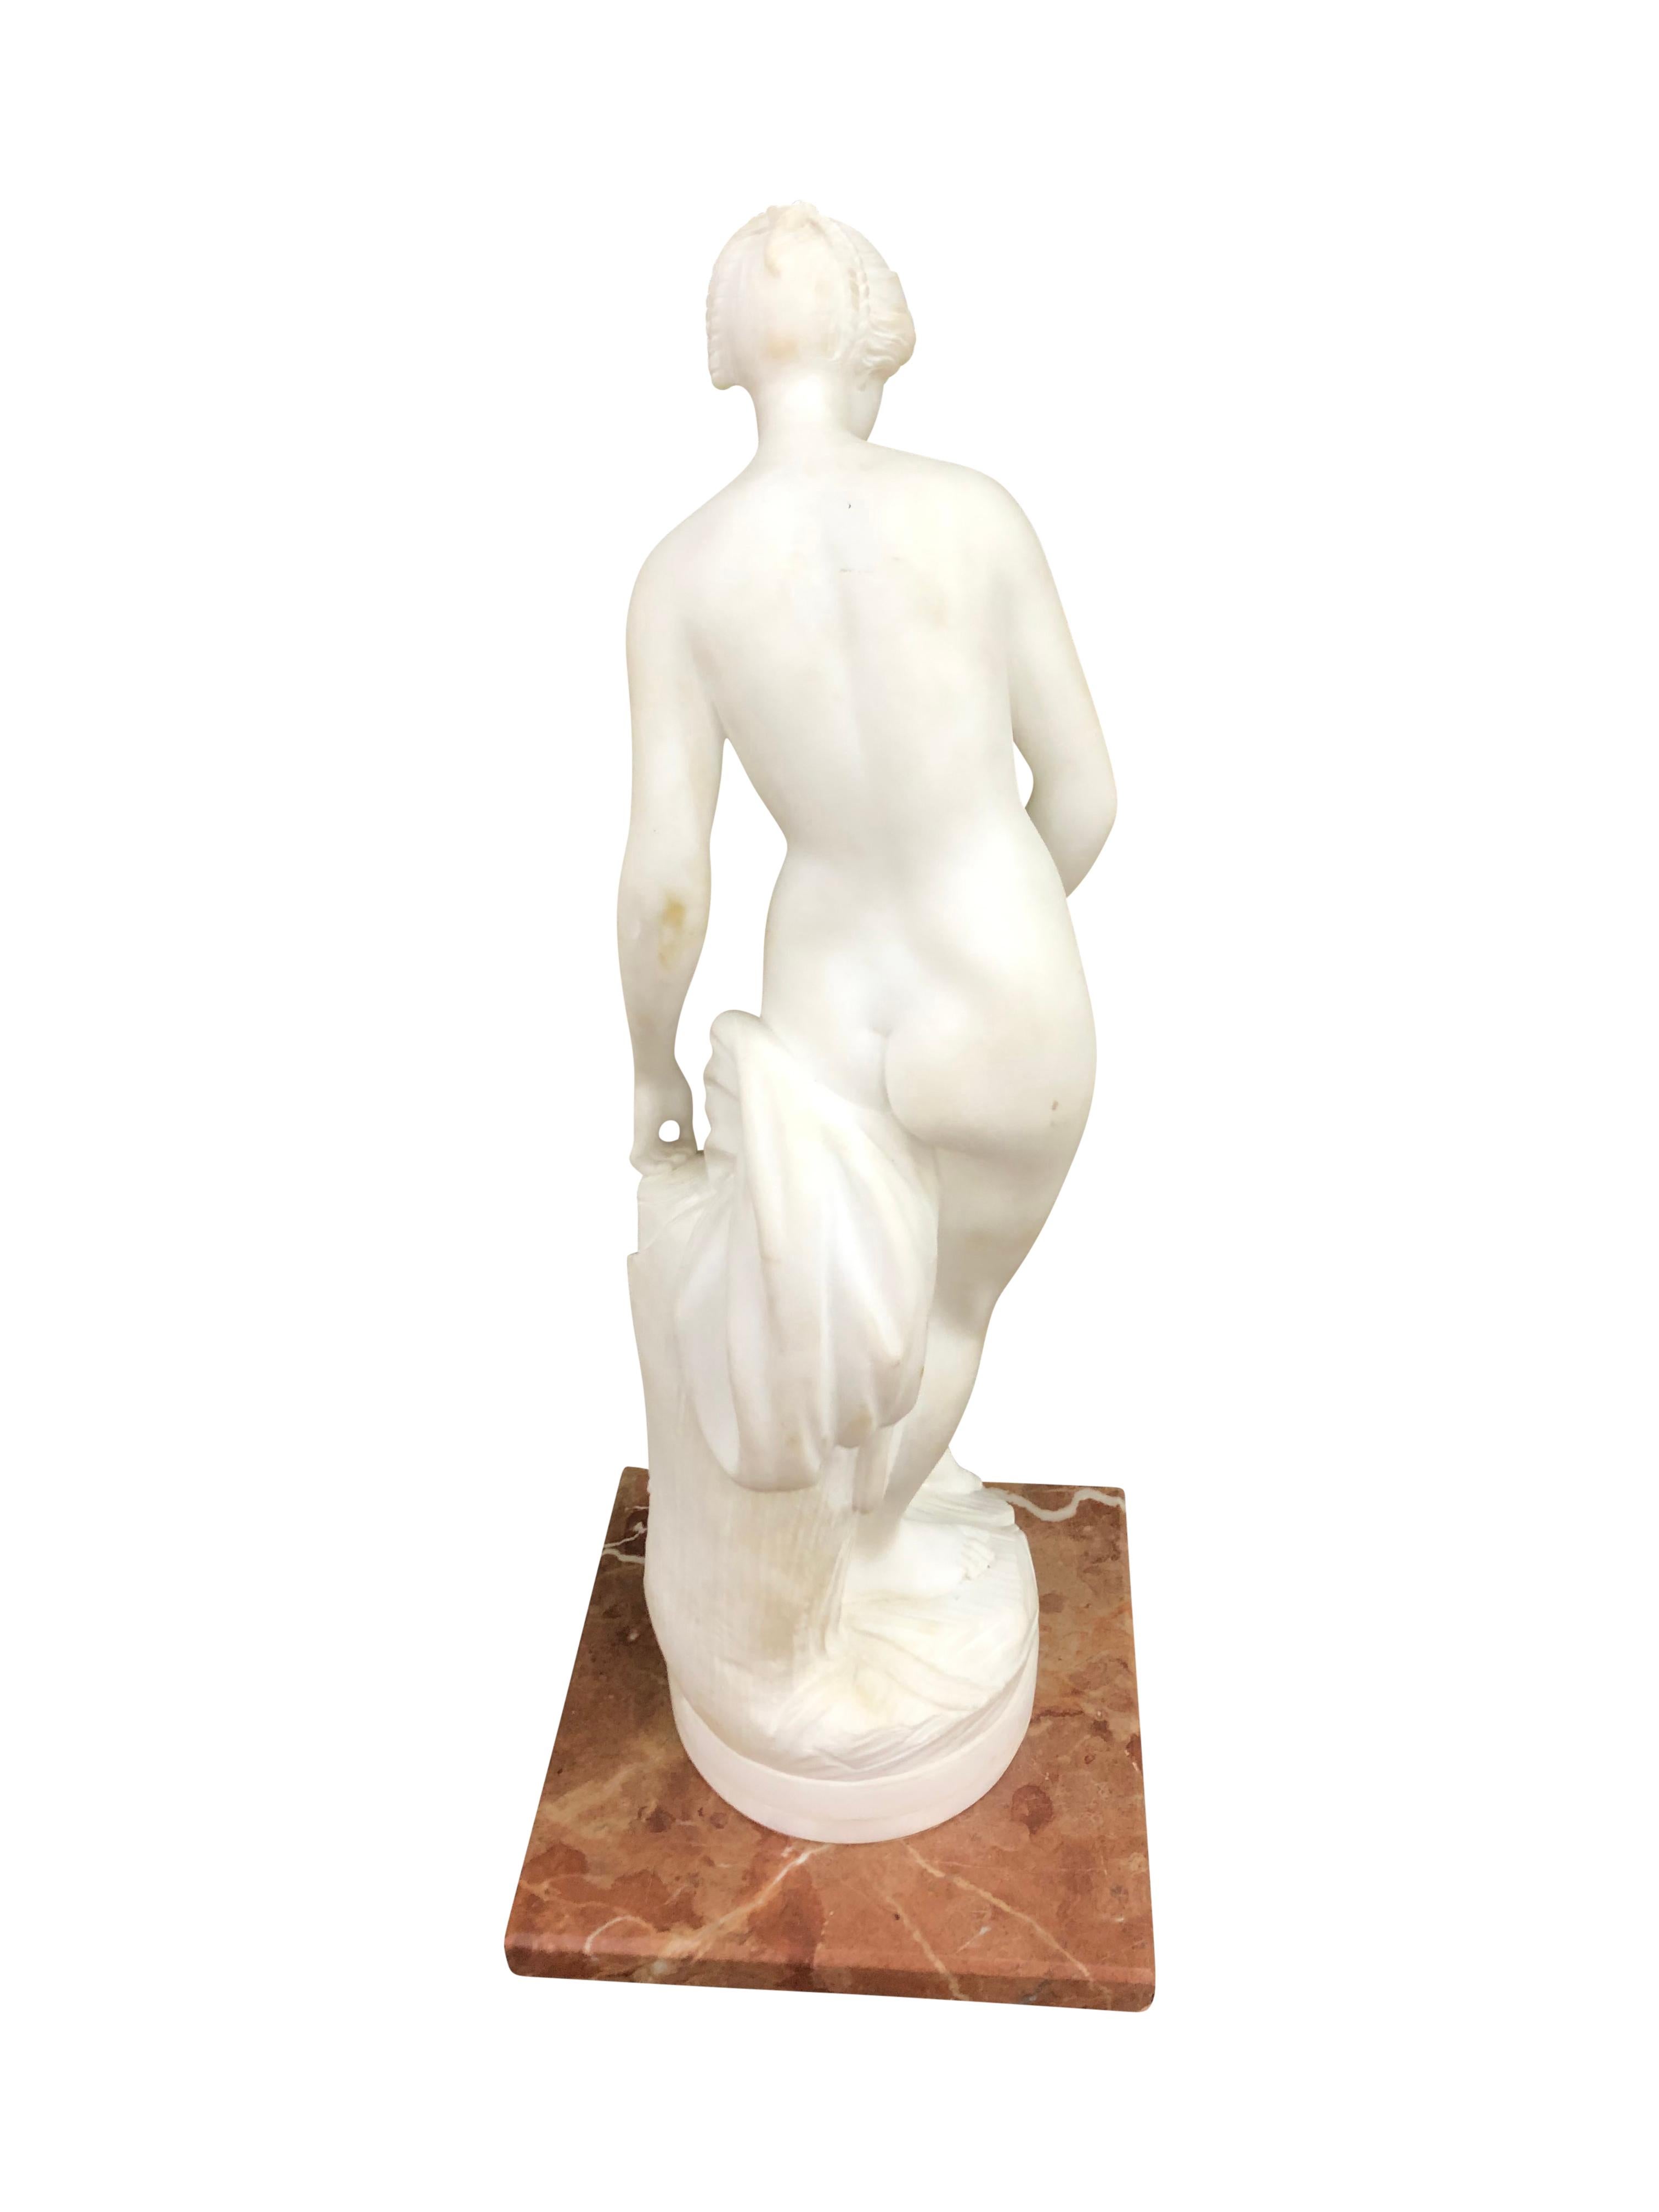 Pair of Antique Italian Marble Sculpture of Classical Female Nude Figures For Sale 2